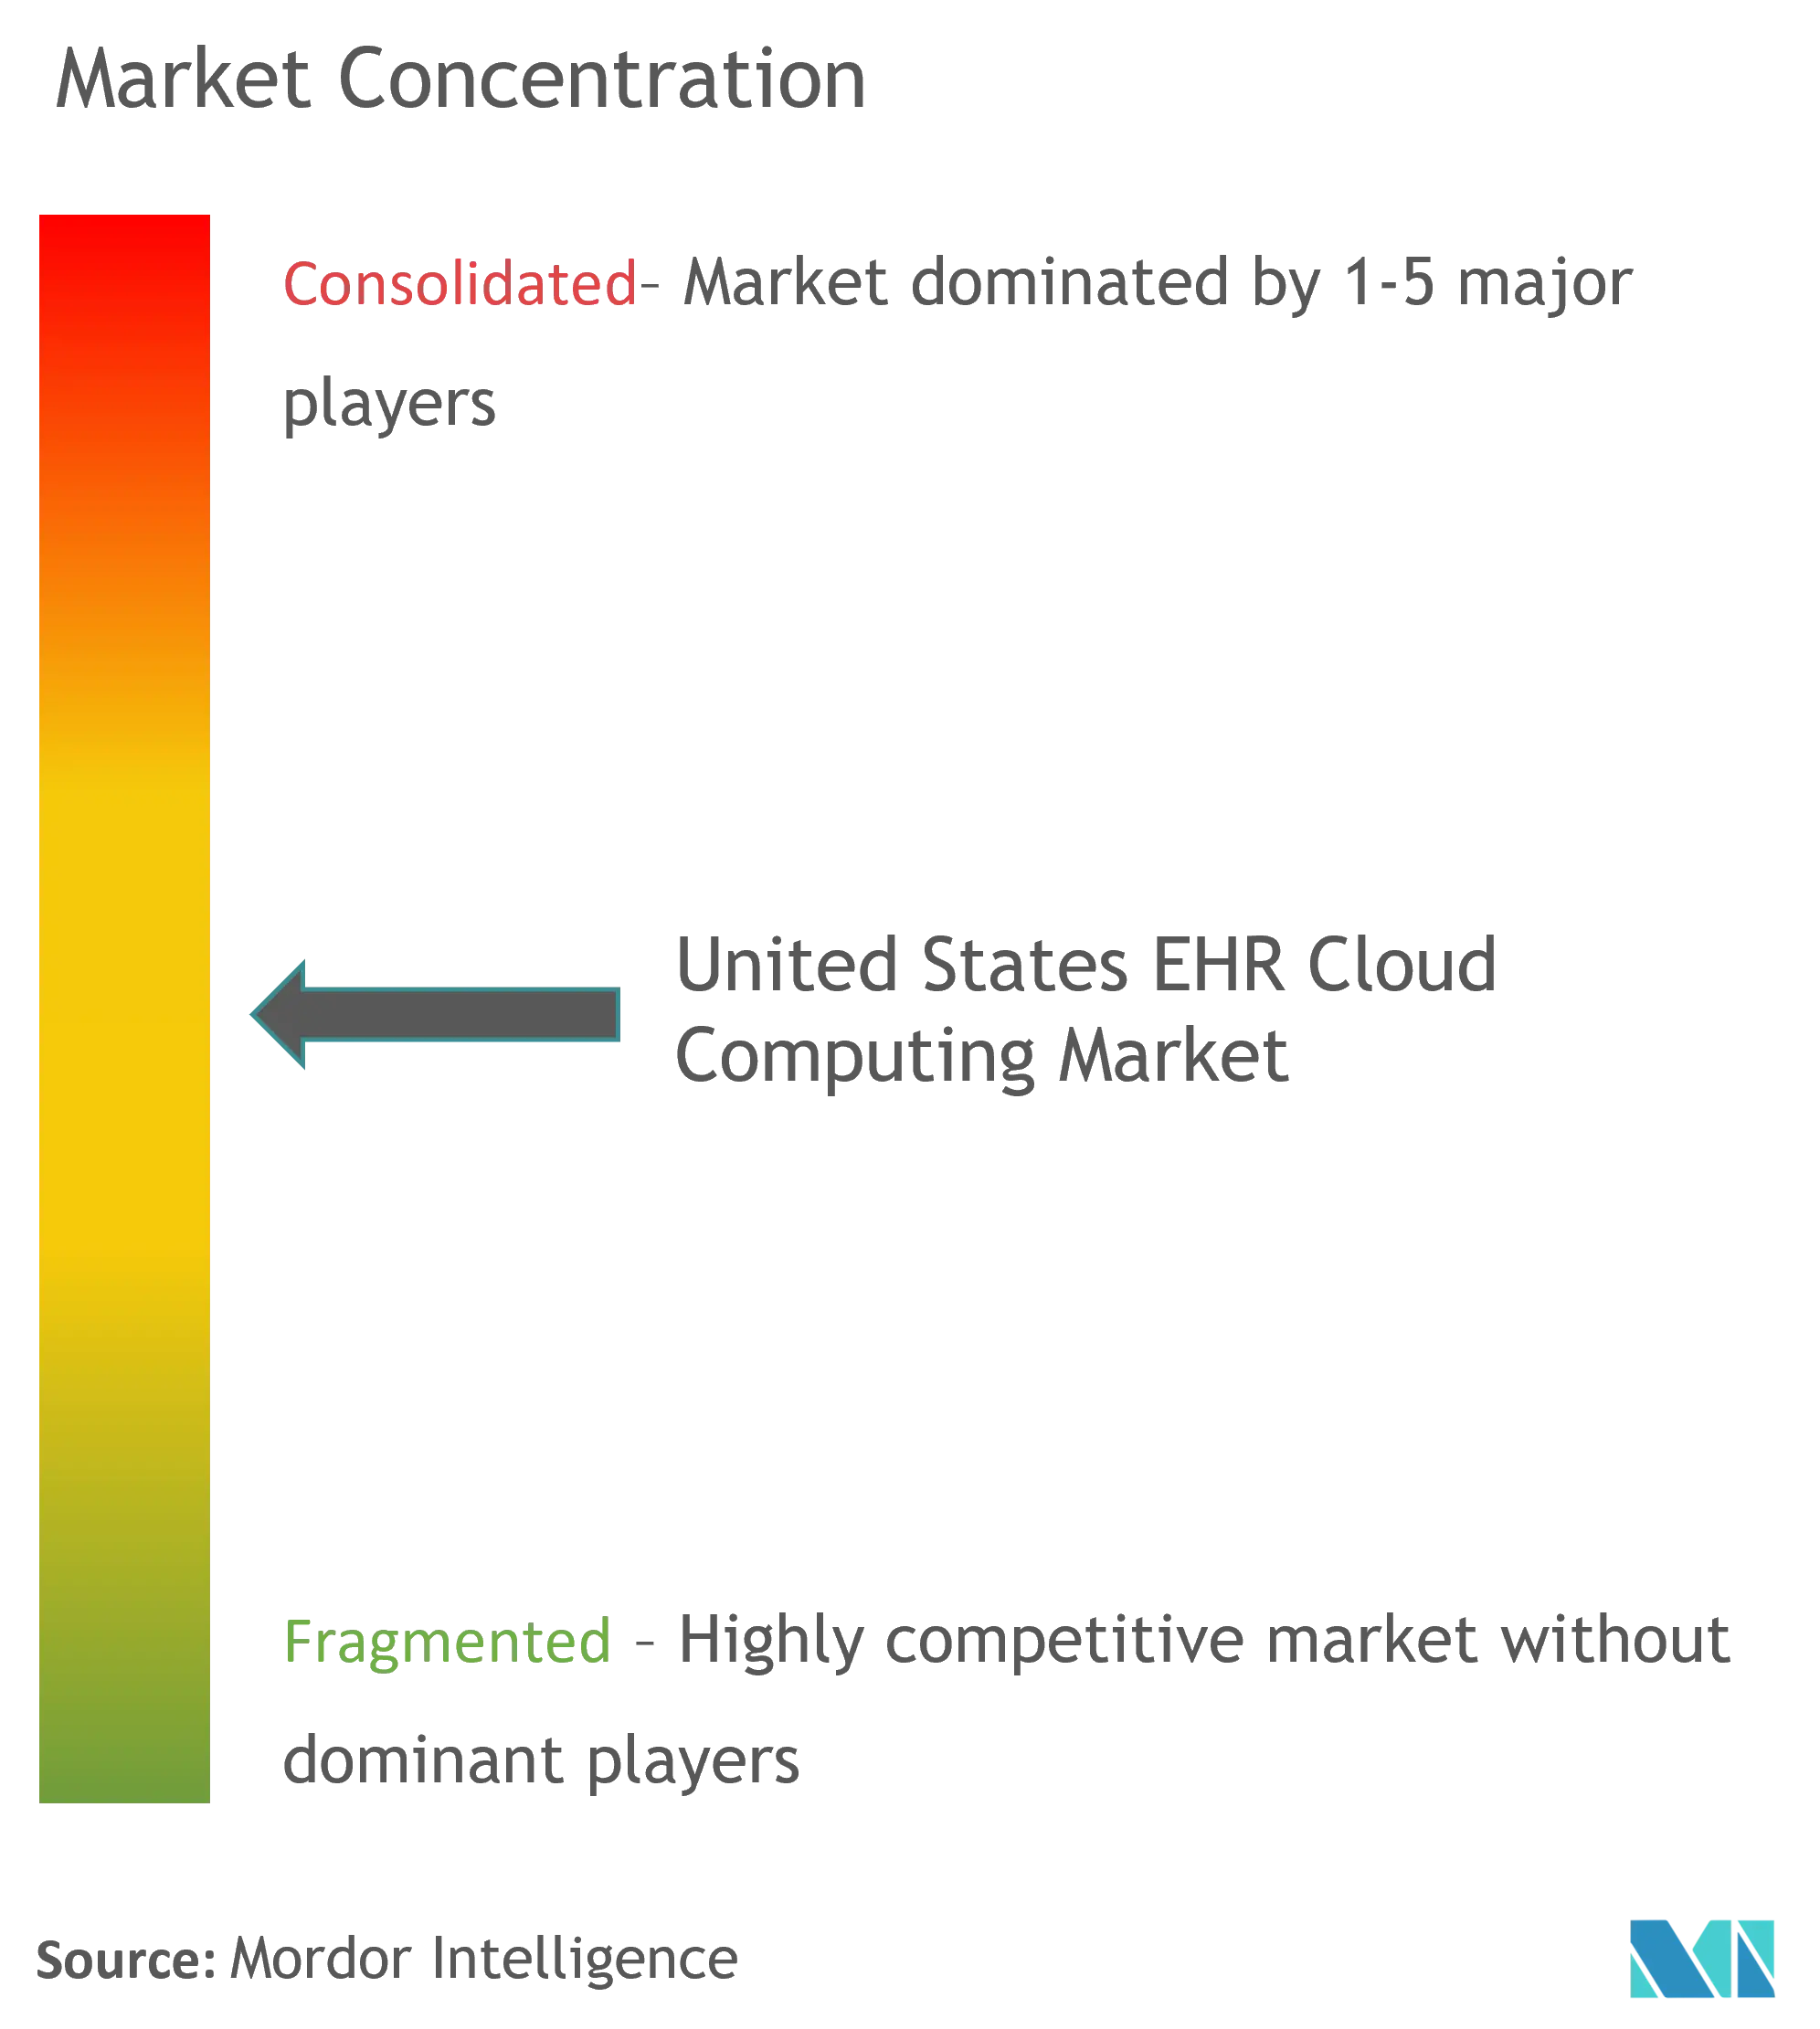 United States EHR Cloud Computing Market Concentration